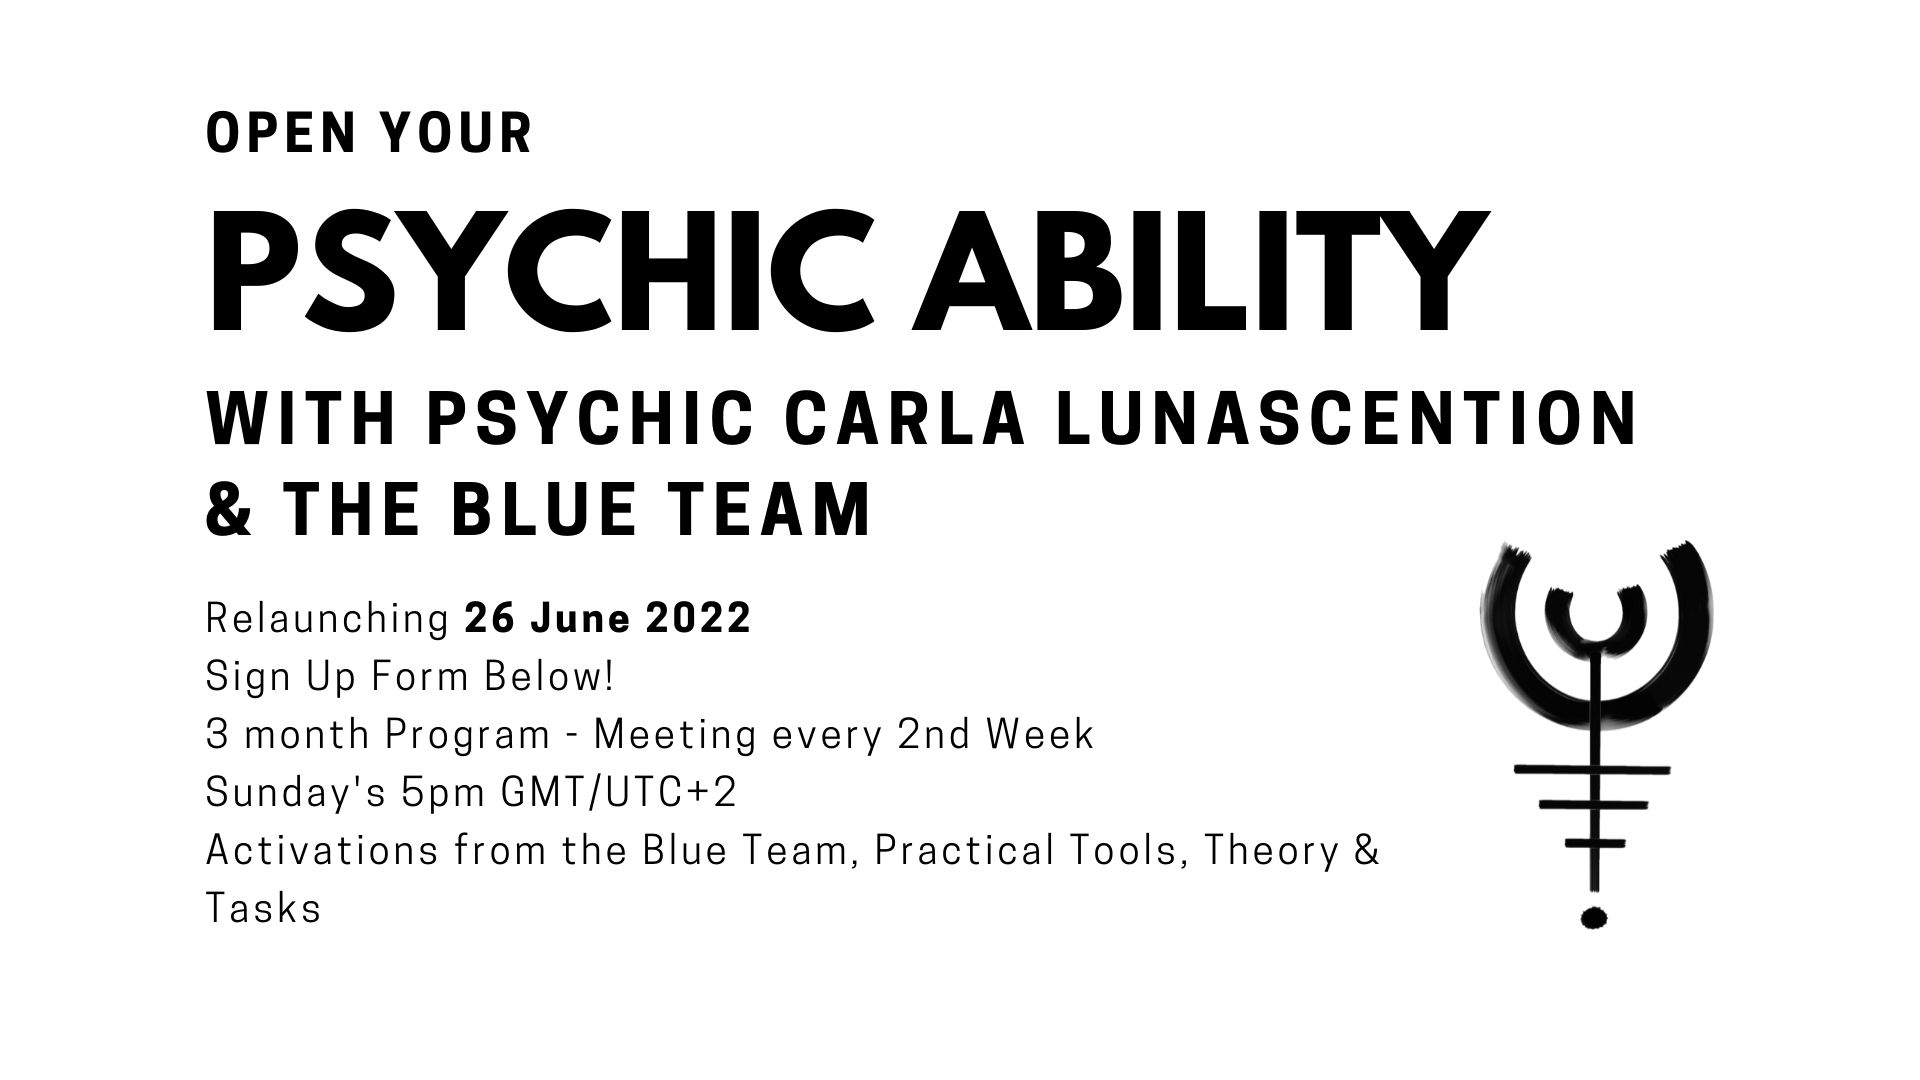 open your Psychic ability with Psychic Carla Lunascention and the Blue Team Relaunching 26 June 2022 Sign Up Form Below! 3 month Program - Meeting every 2nd Week  Sunday's 5pm GMT/UTC+2 Activations from the Blue Team, Practical Tools, Theory & Tasks